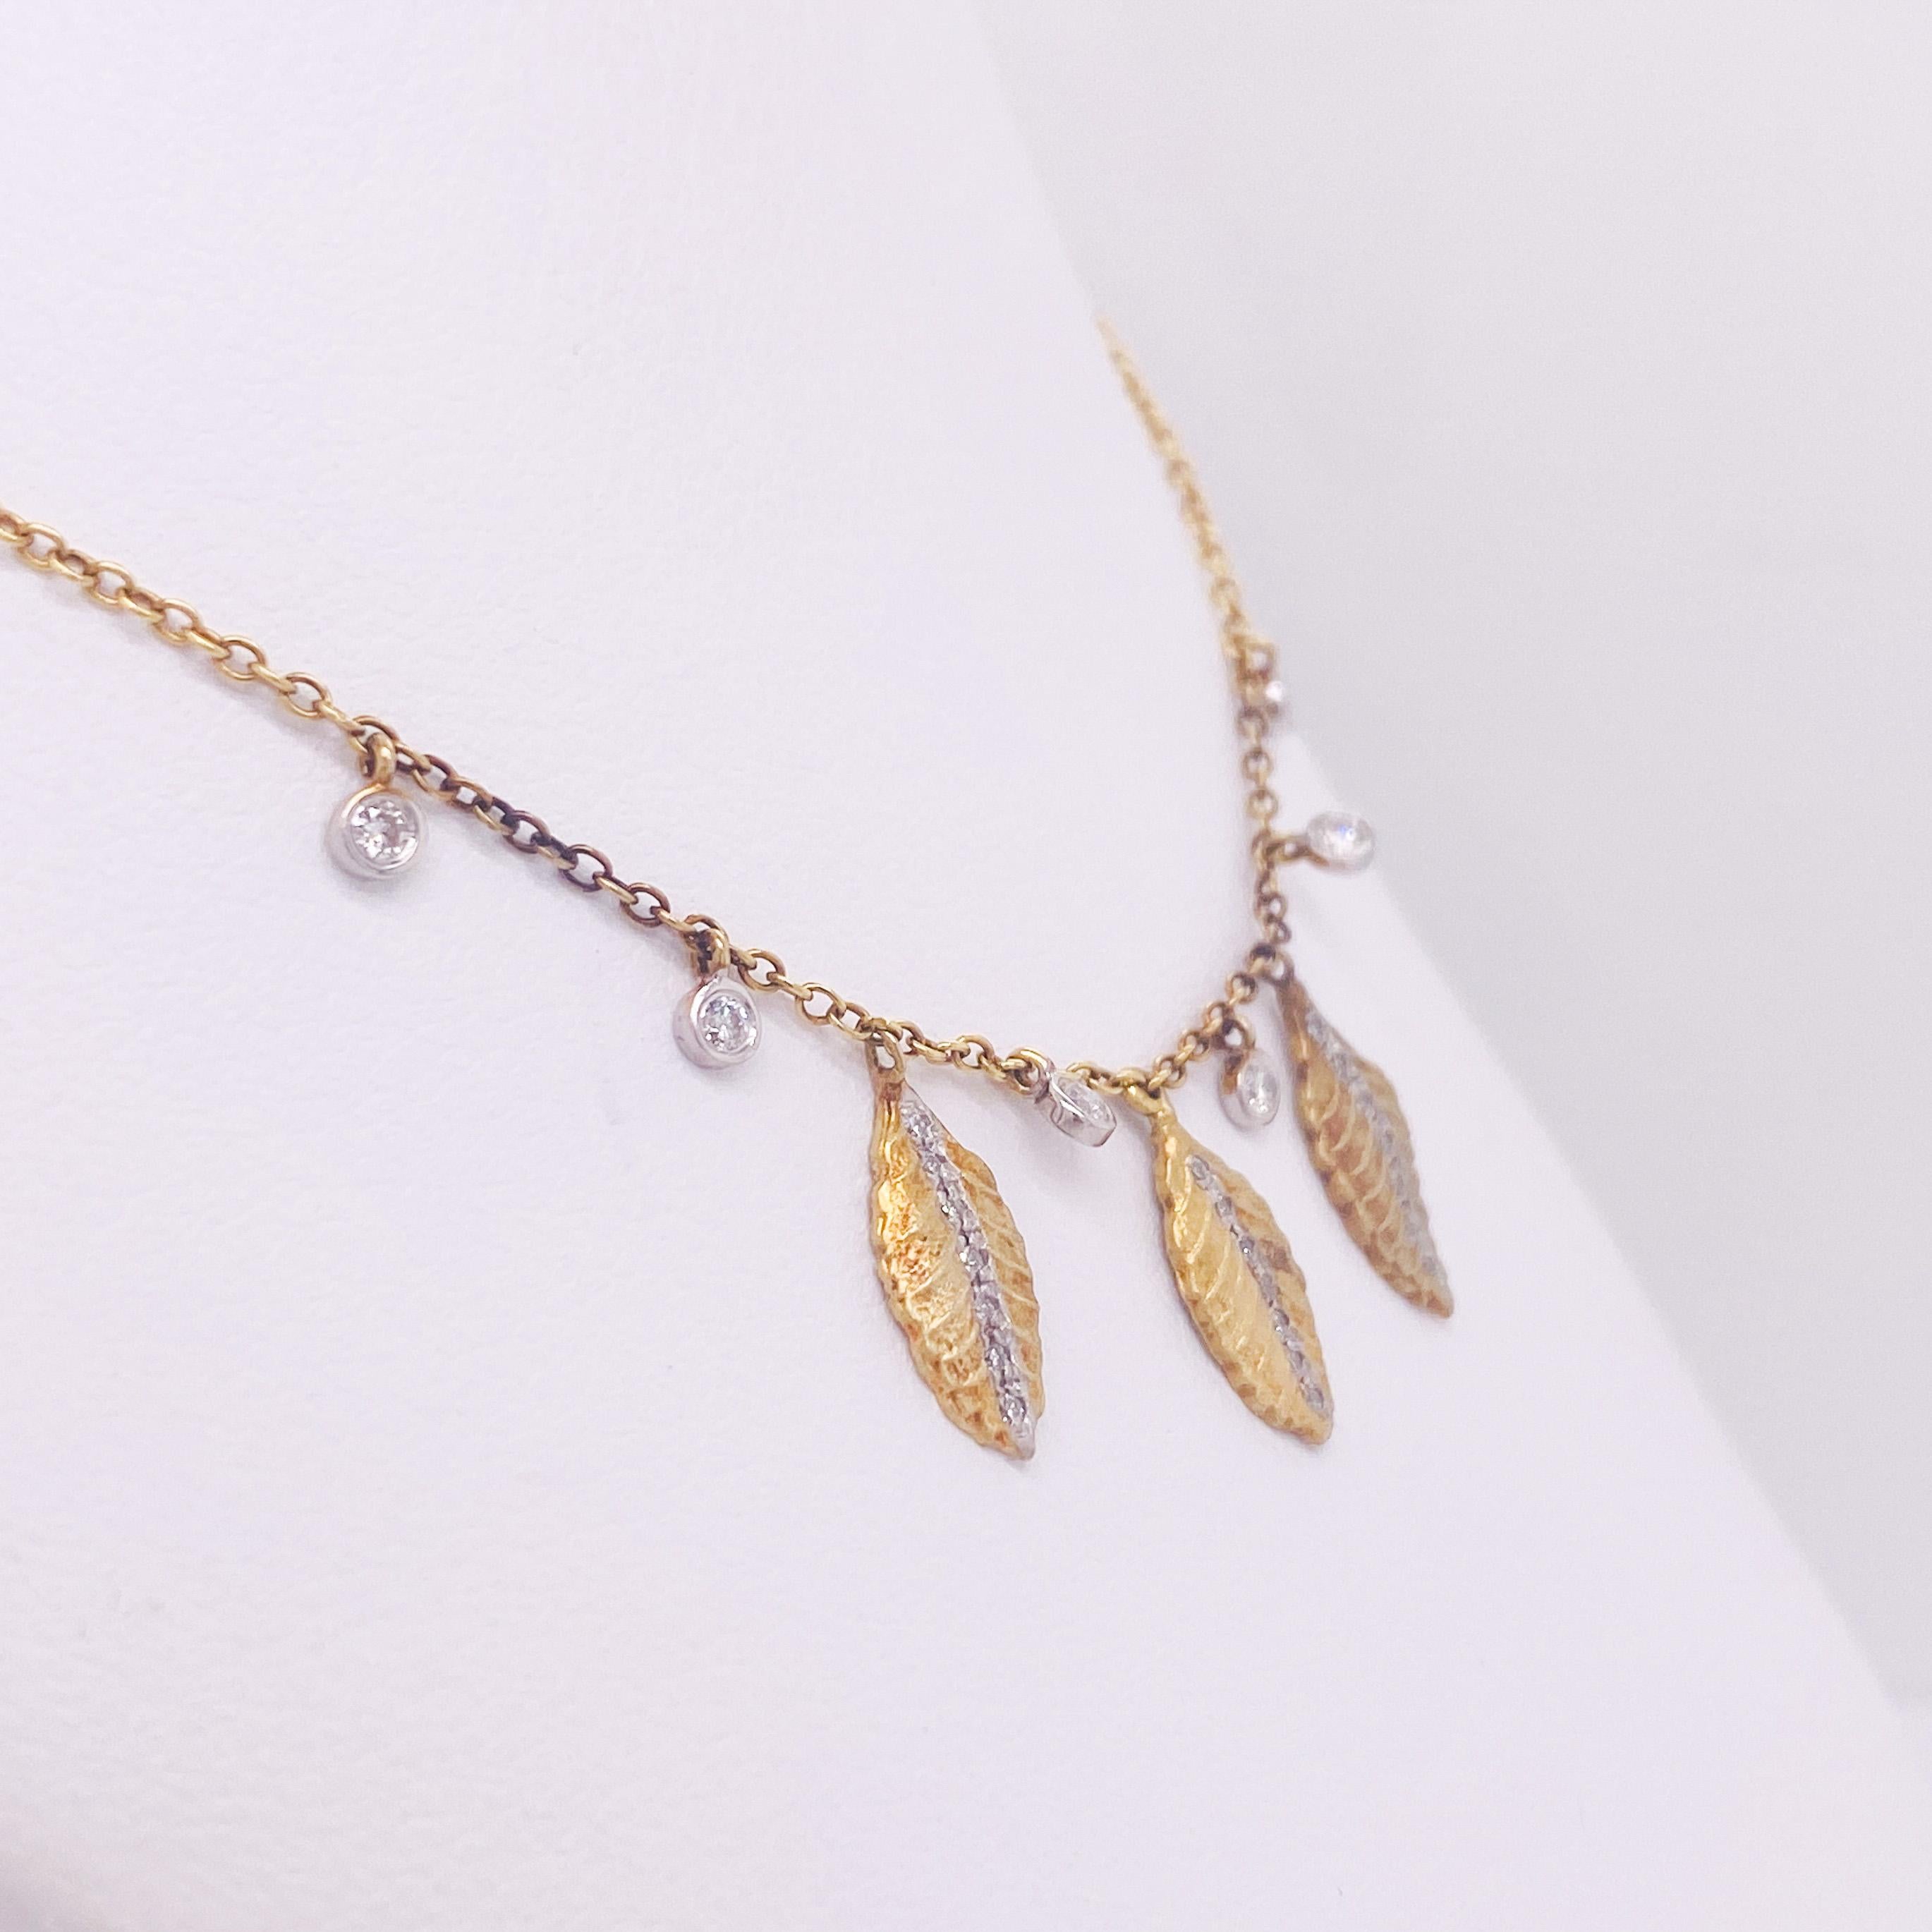 If you like artisan style pieces then this necklace is for you! The 18 karat yellow gold charms fall gracefully on your chest. The diamonds that separate the leaves and add a touch of sparkle are the excellent touch that completes this necklace and